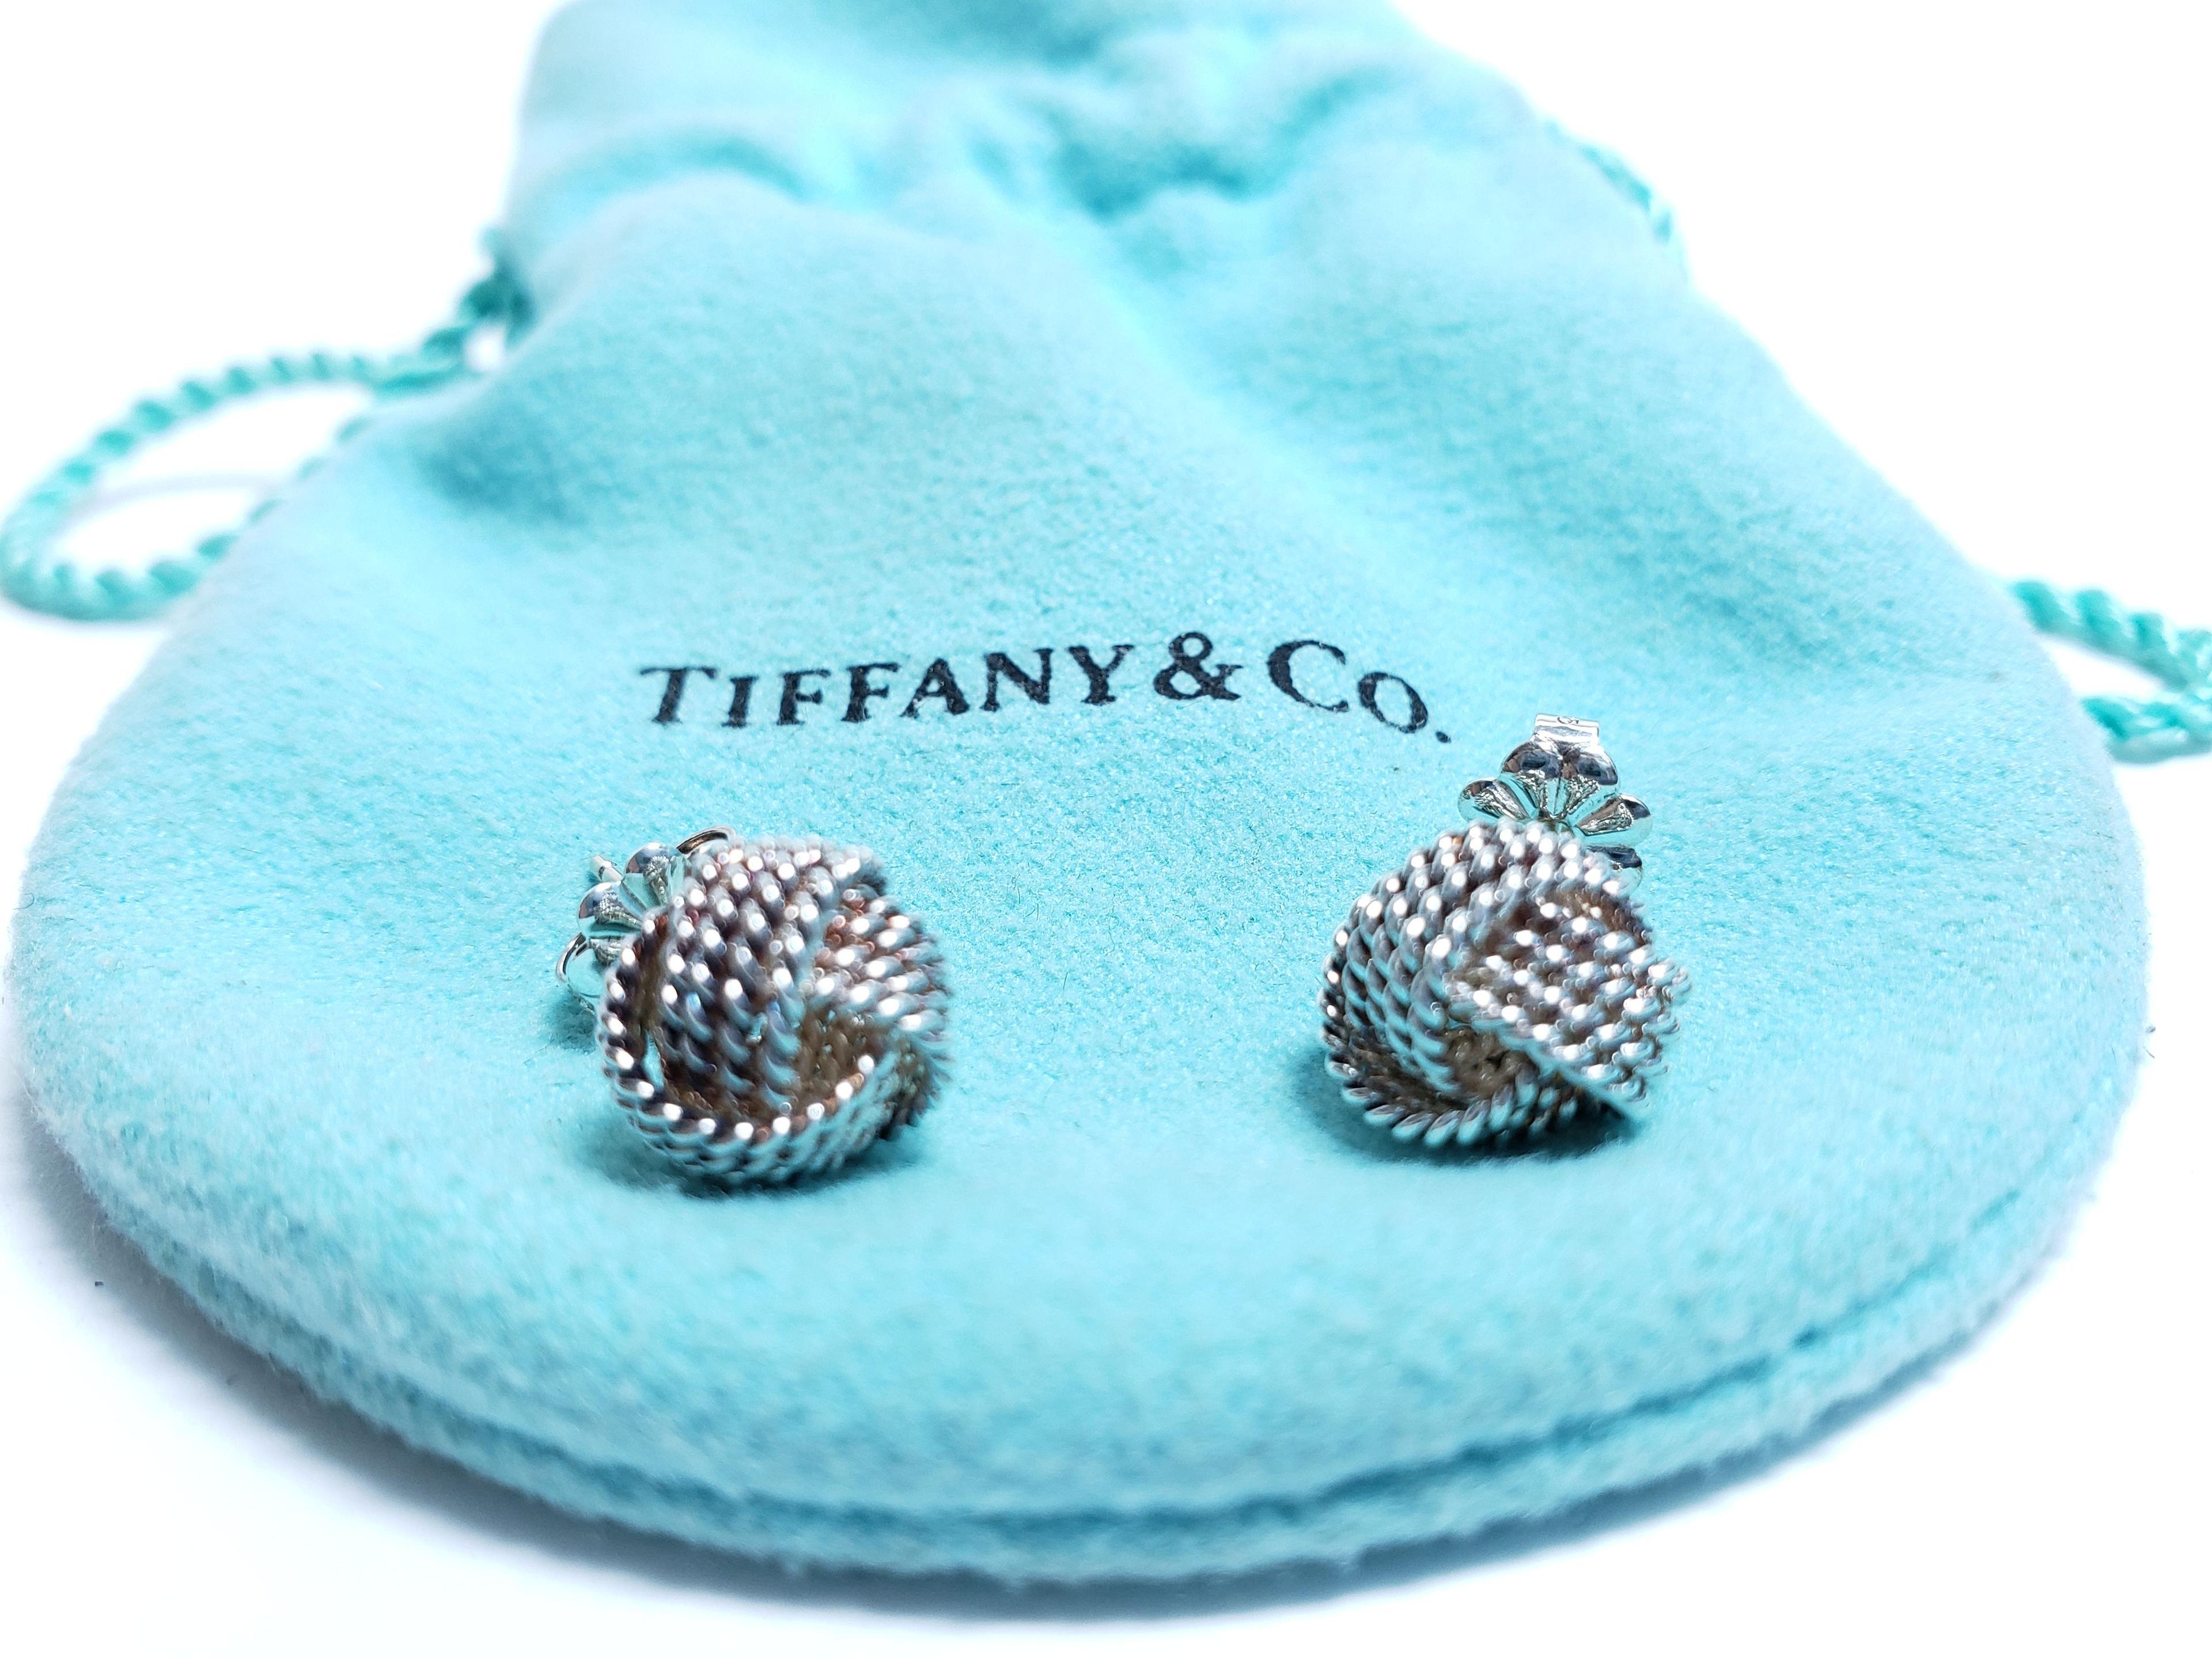 Authentic Tiffany & Co. Silver 925 Mesh Ball Earrings with Original Pouch